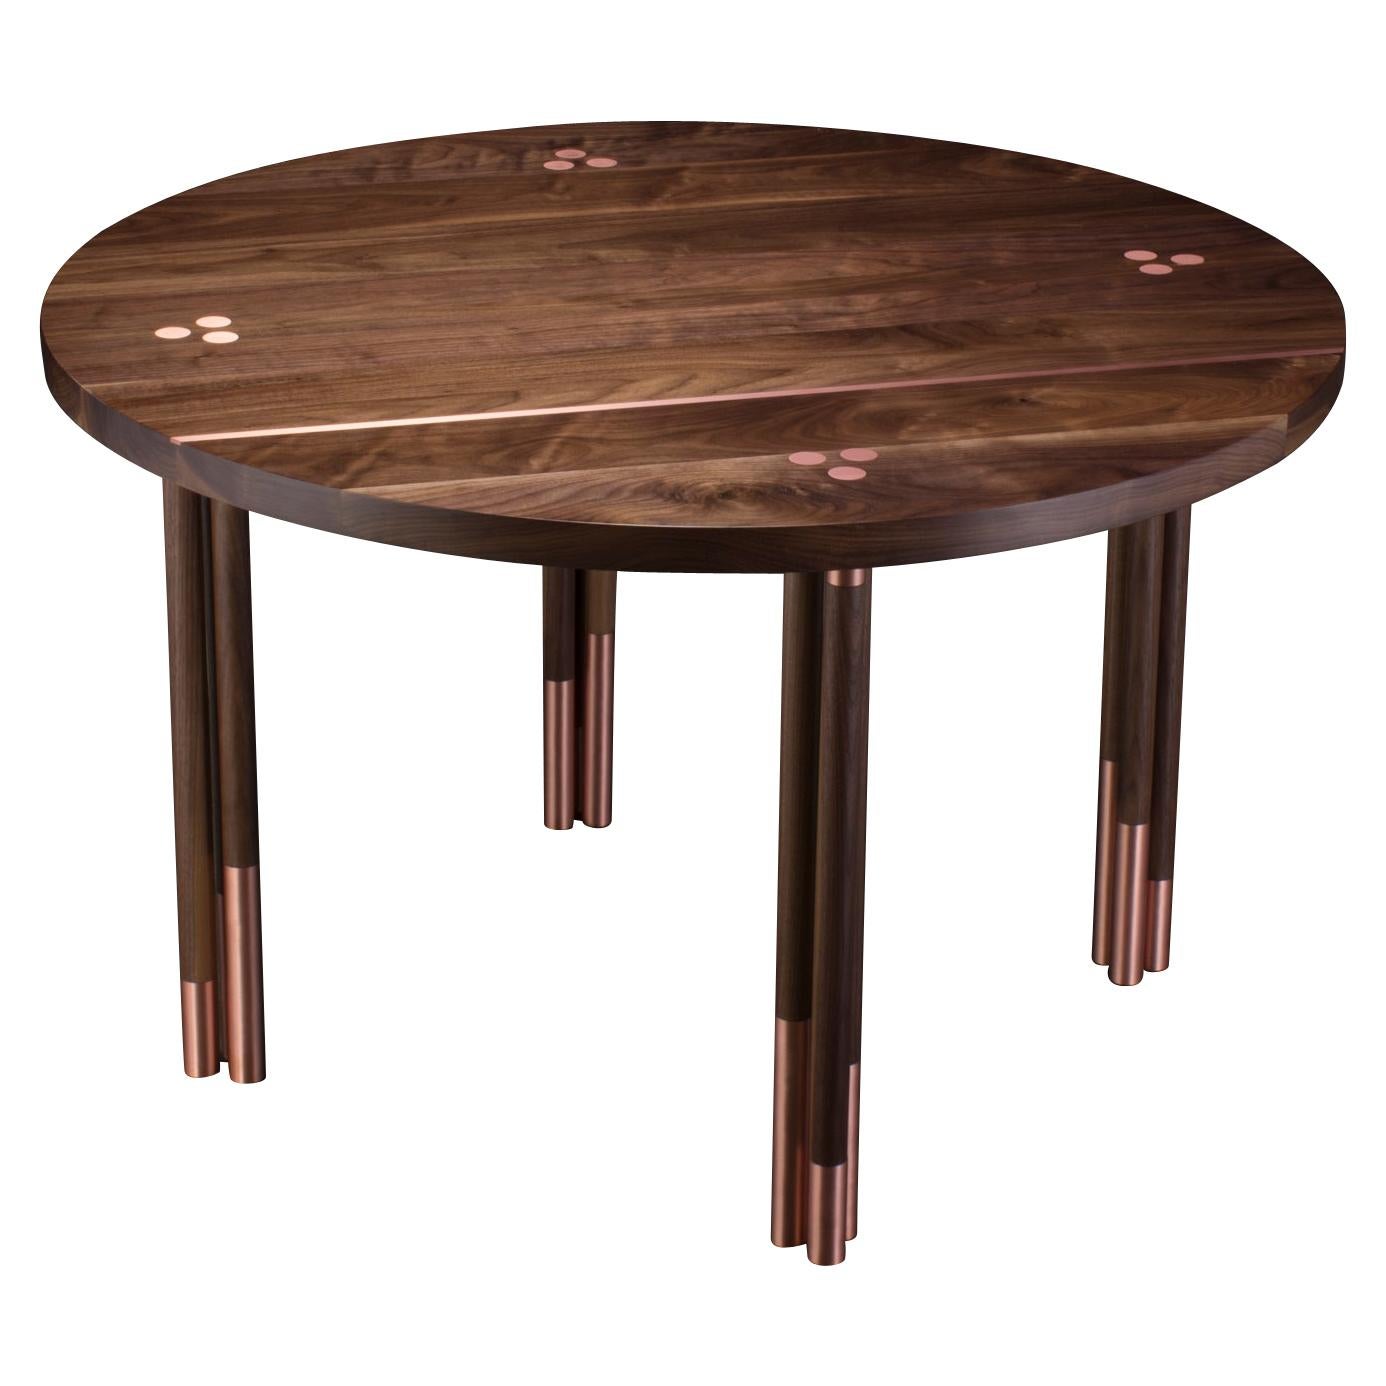 Walnut Circular Dining Table with Copper Inlay "Canfield Dining Table" For Sale